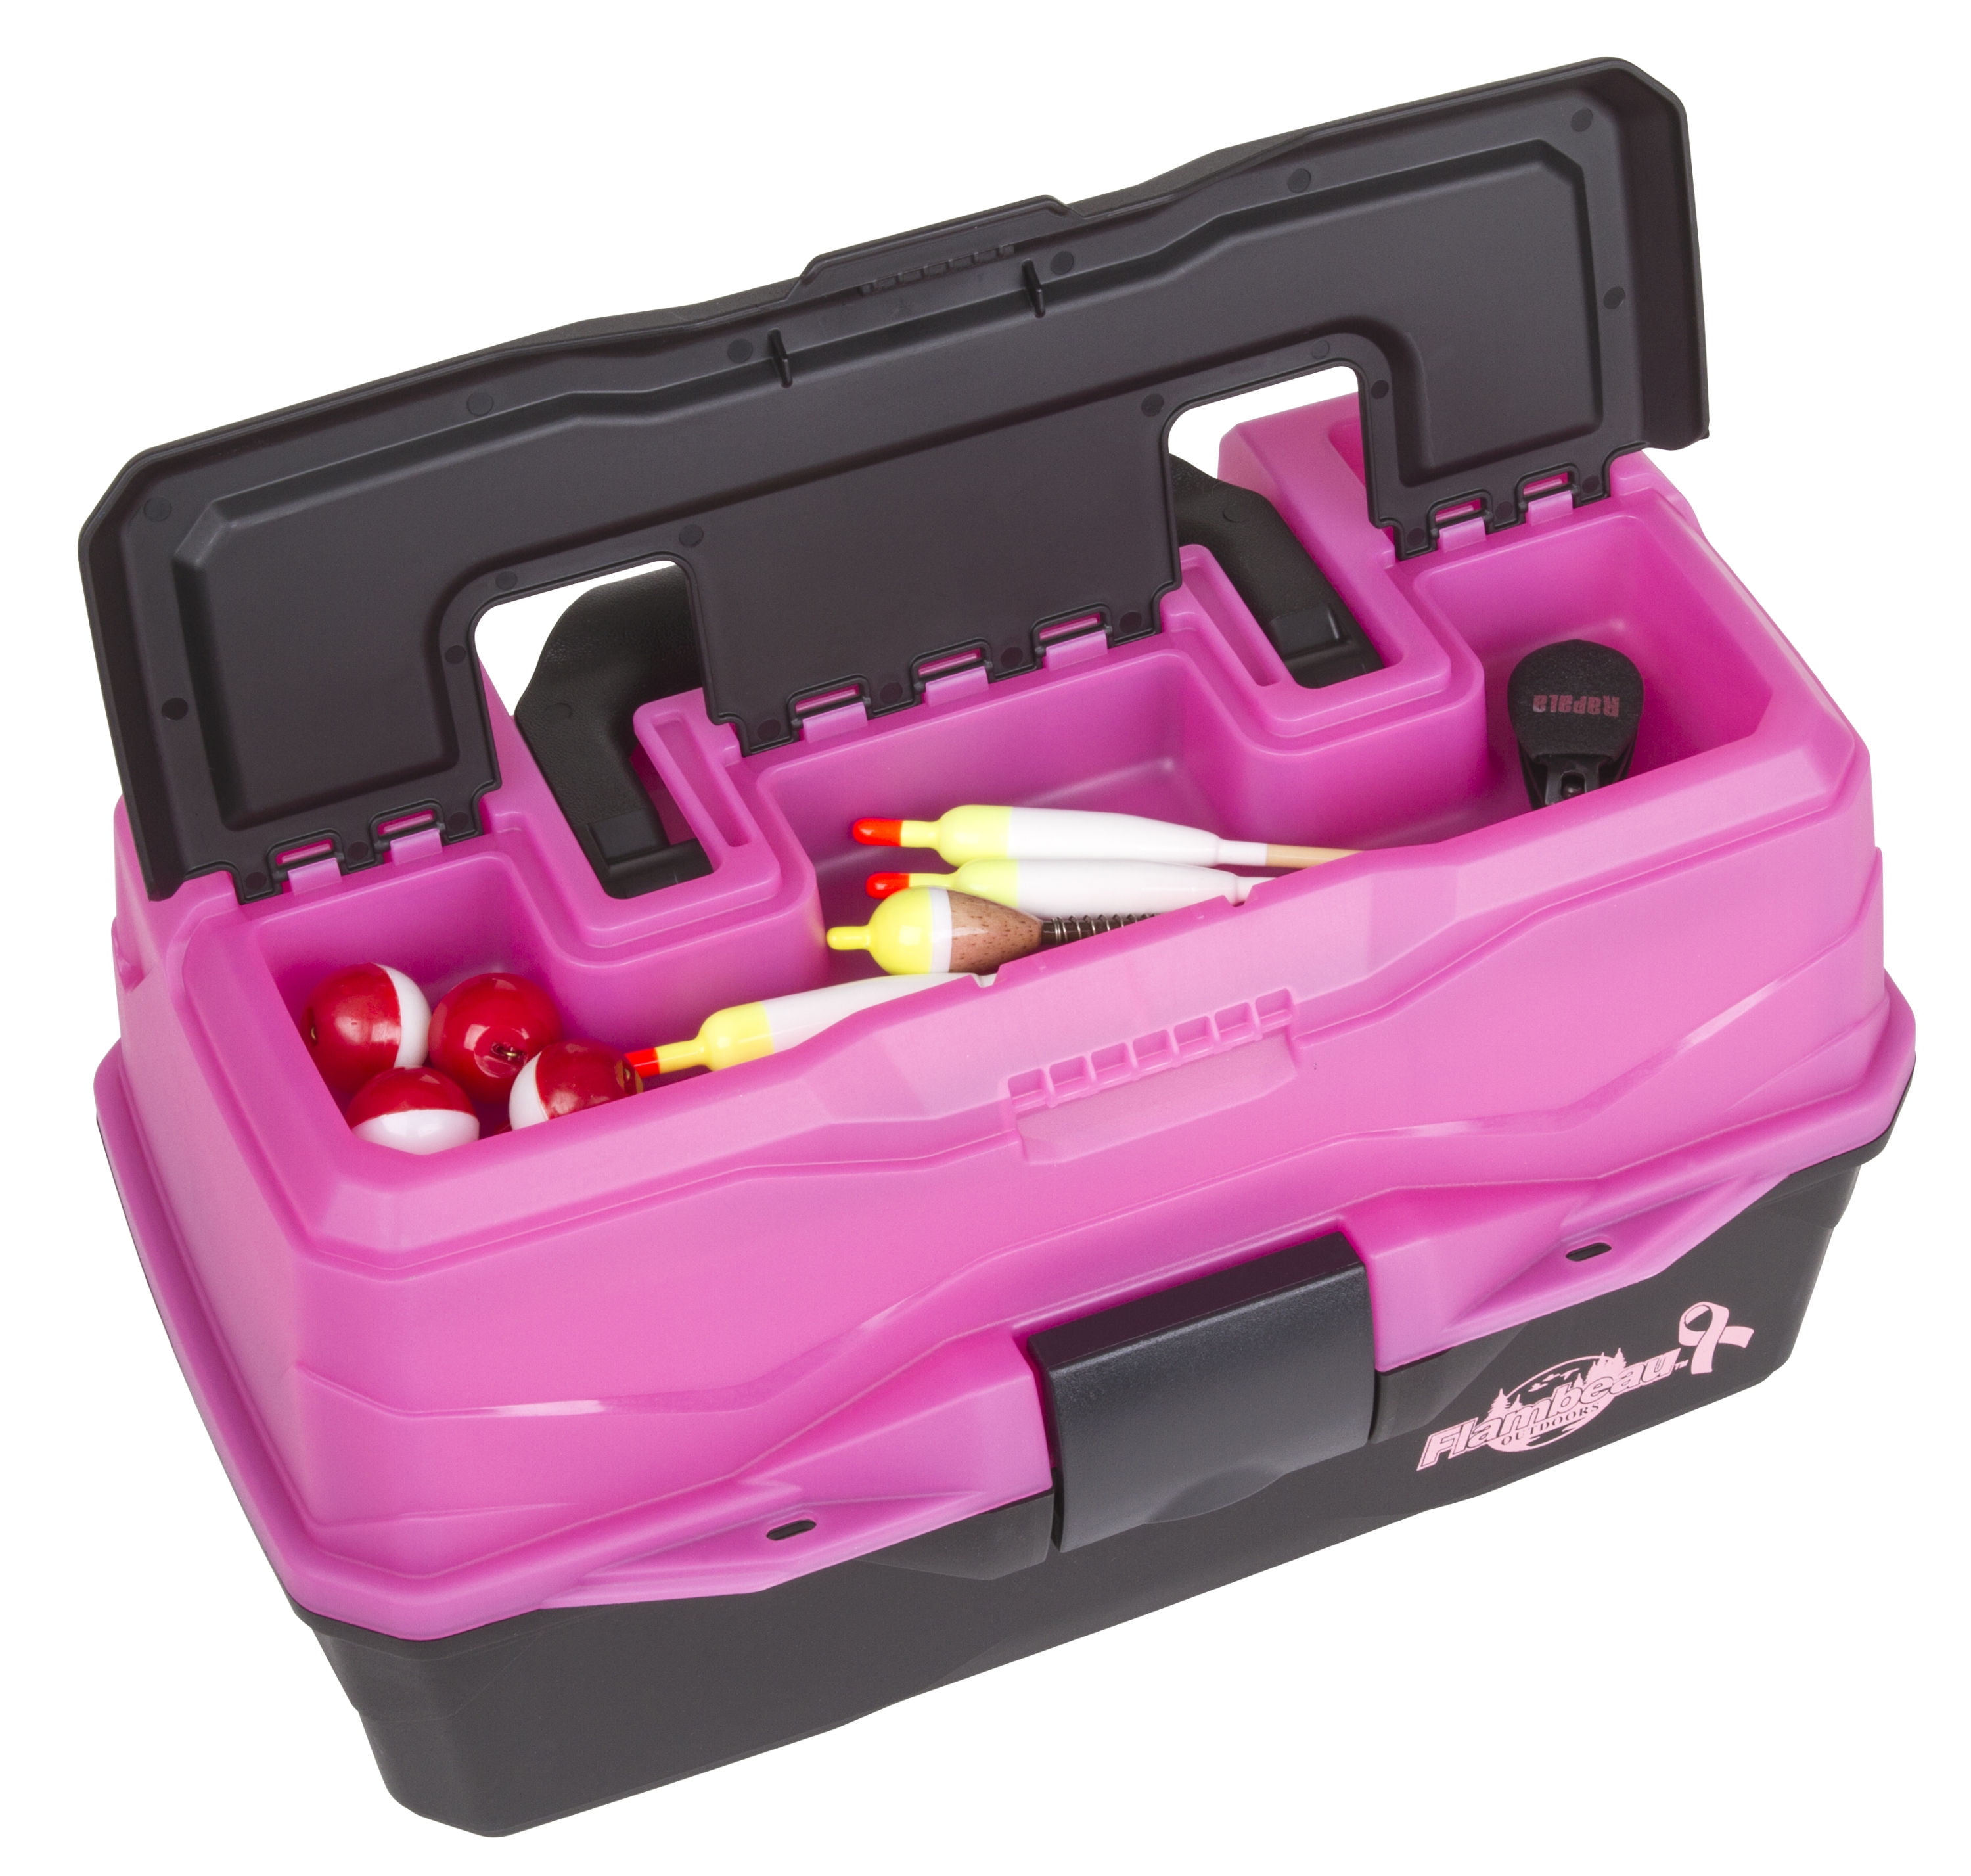 Flambeau Classic 2-Tray Tackle Box, Frost Pink and Black - Walmart